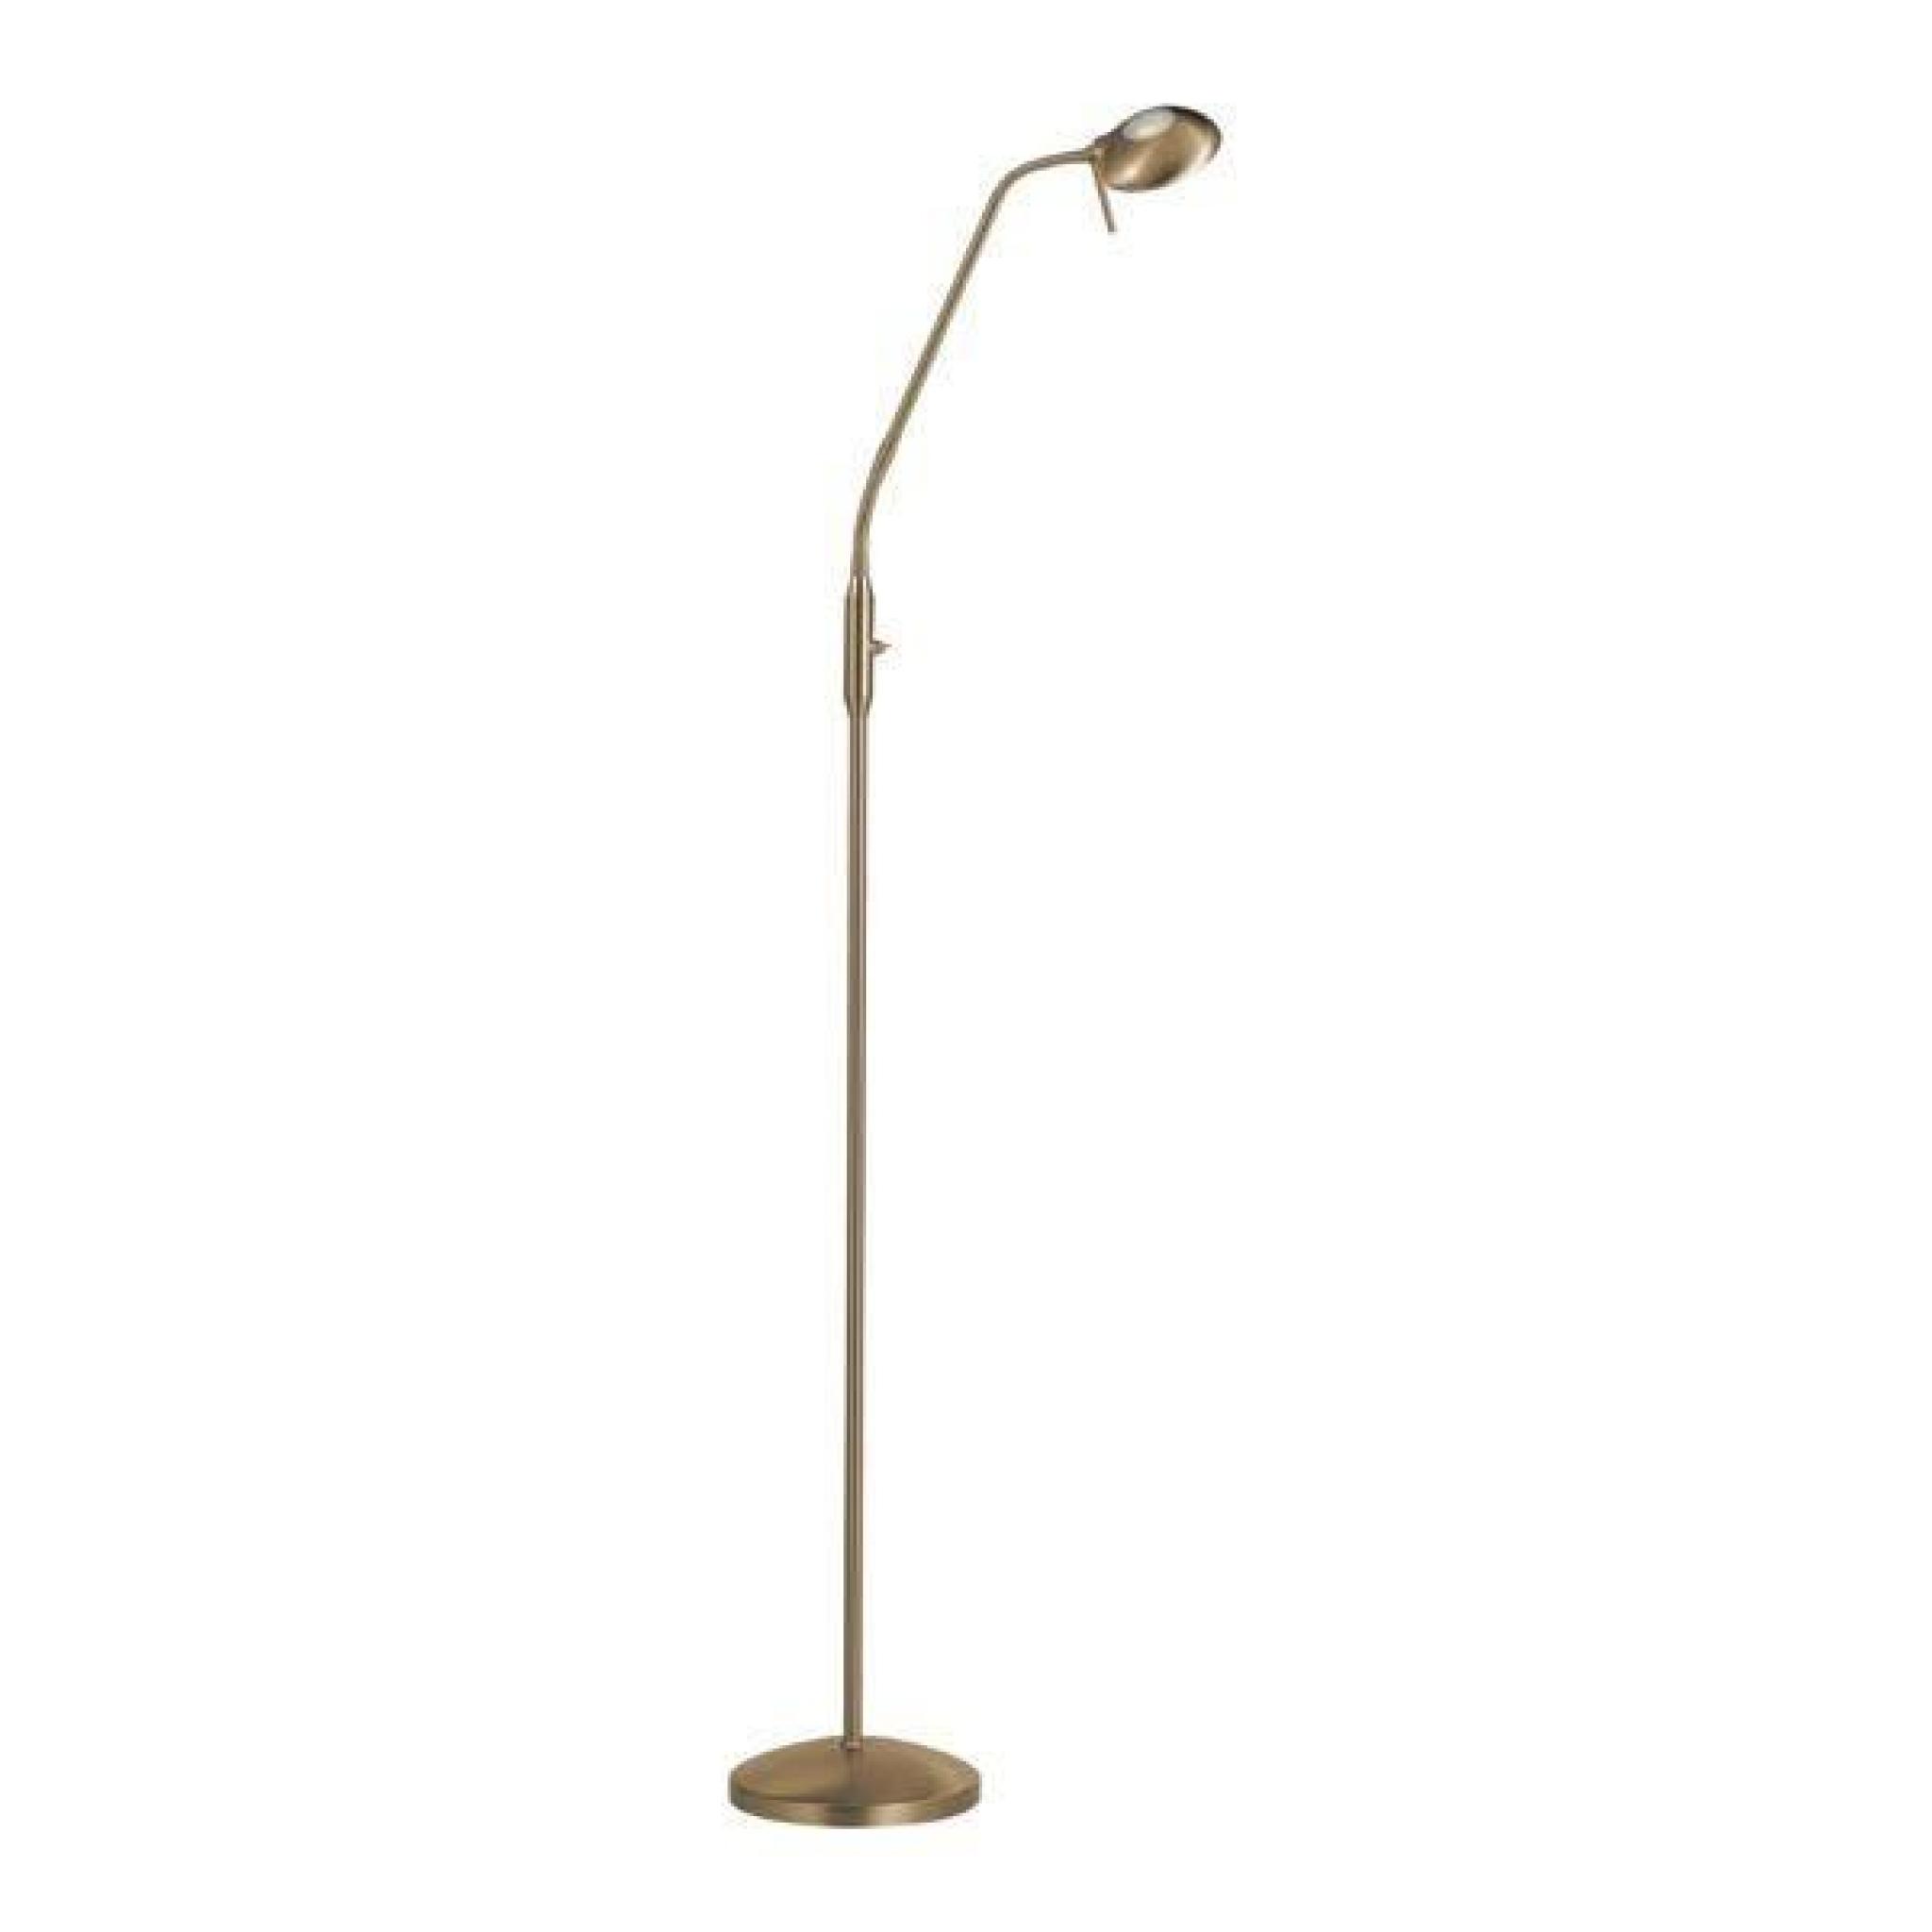 Lampadaire LED Lilly laiton antique.